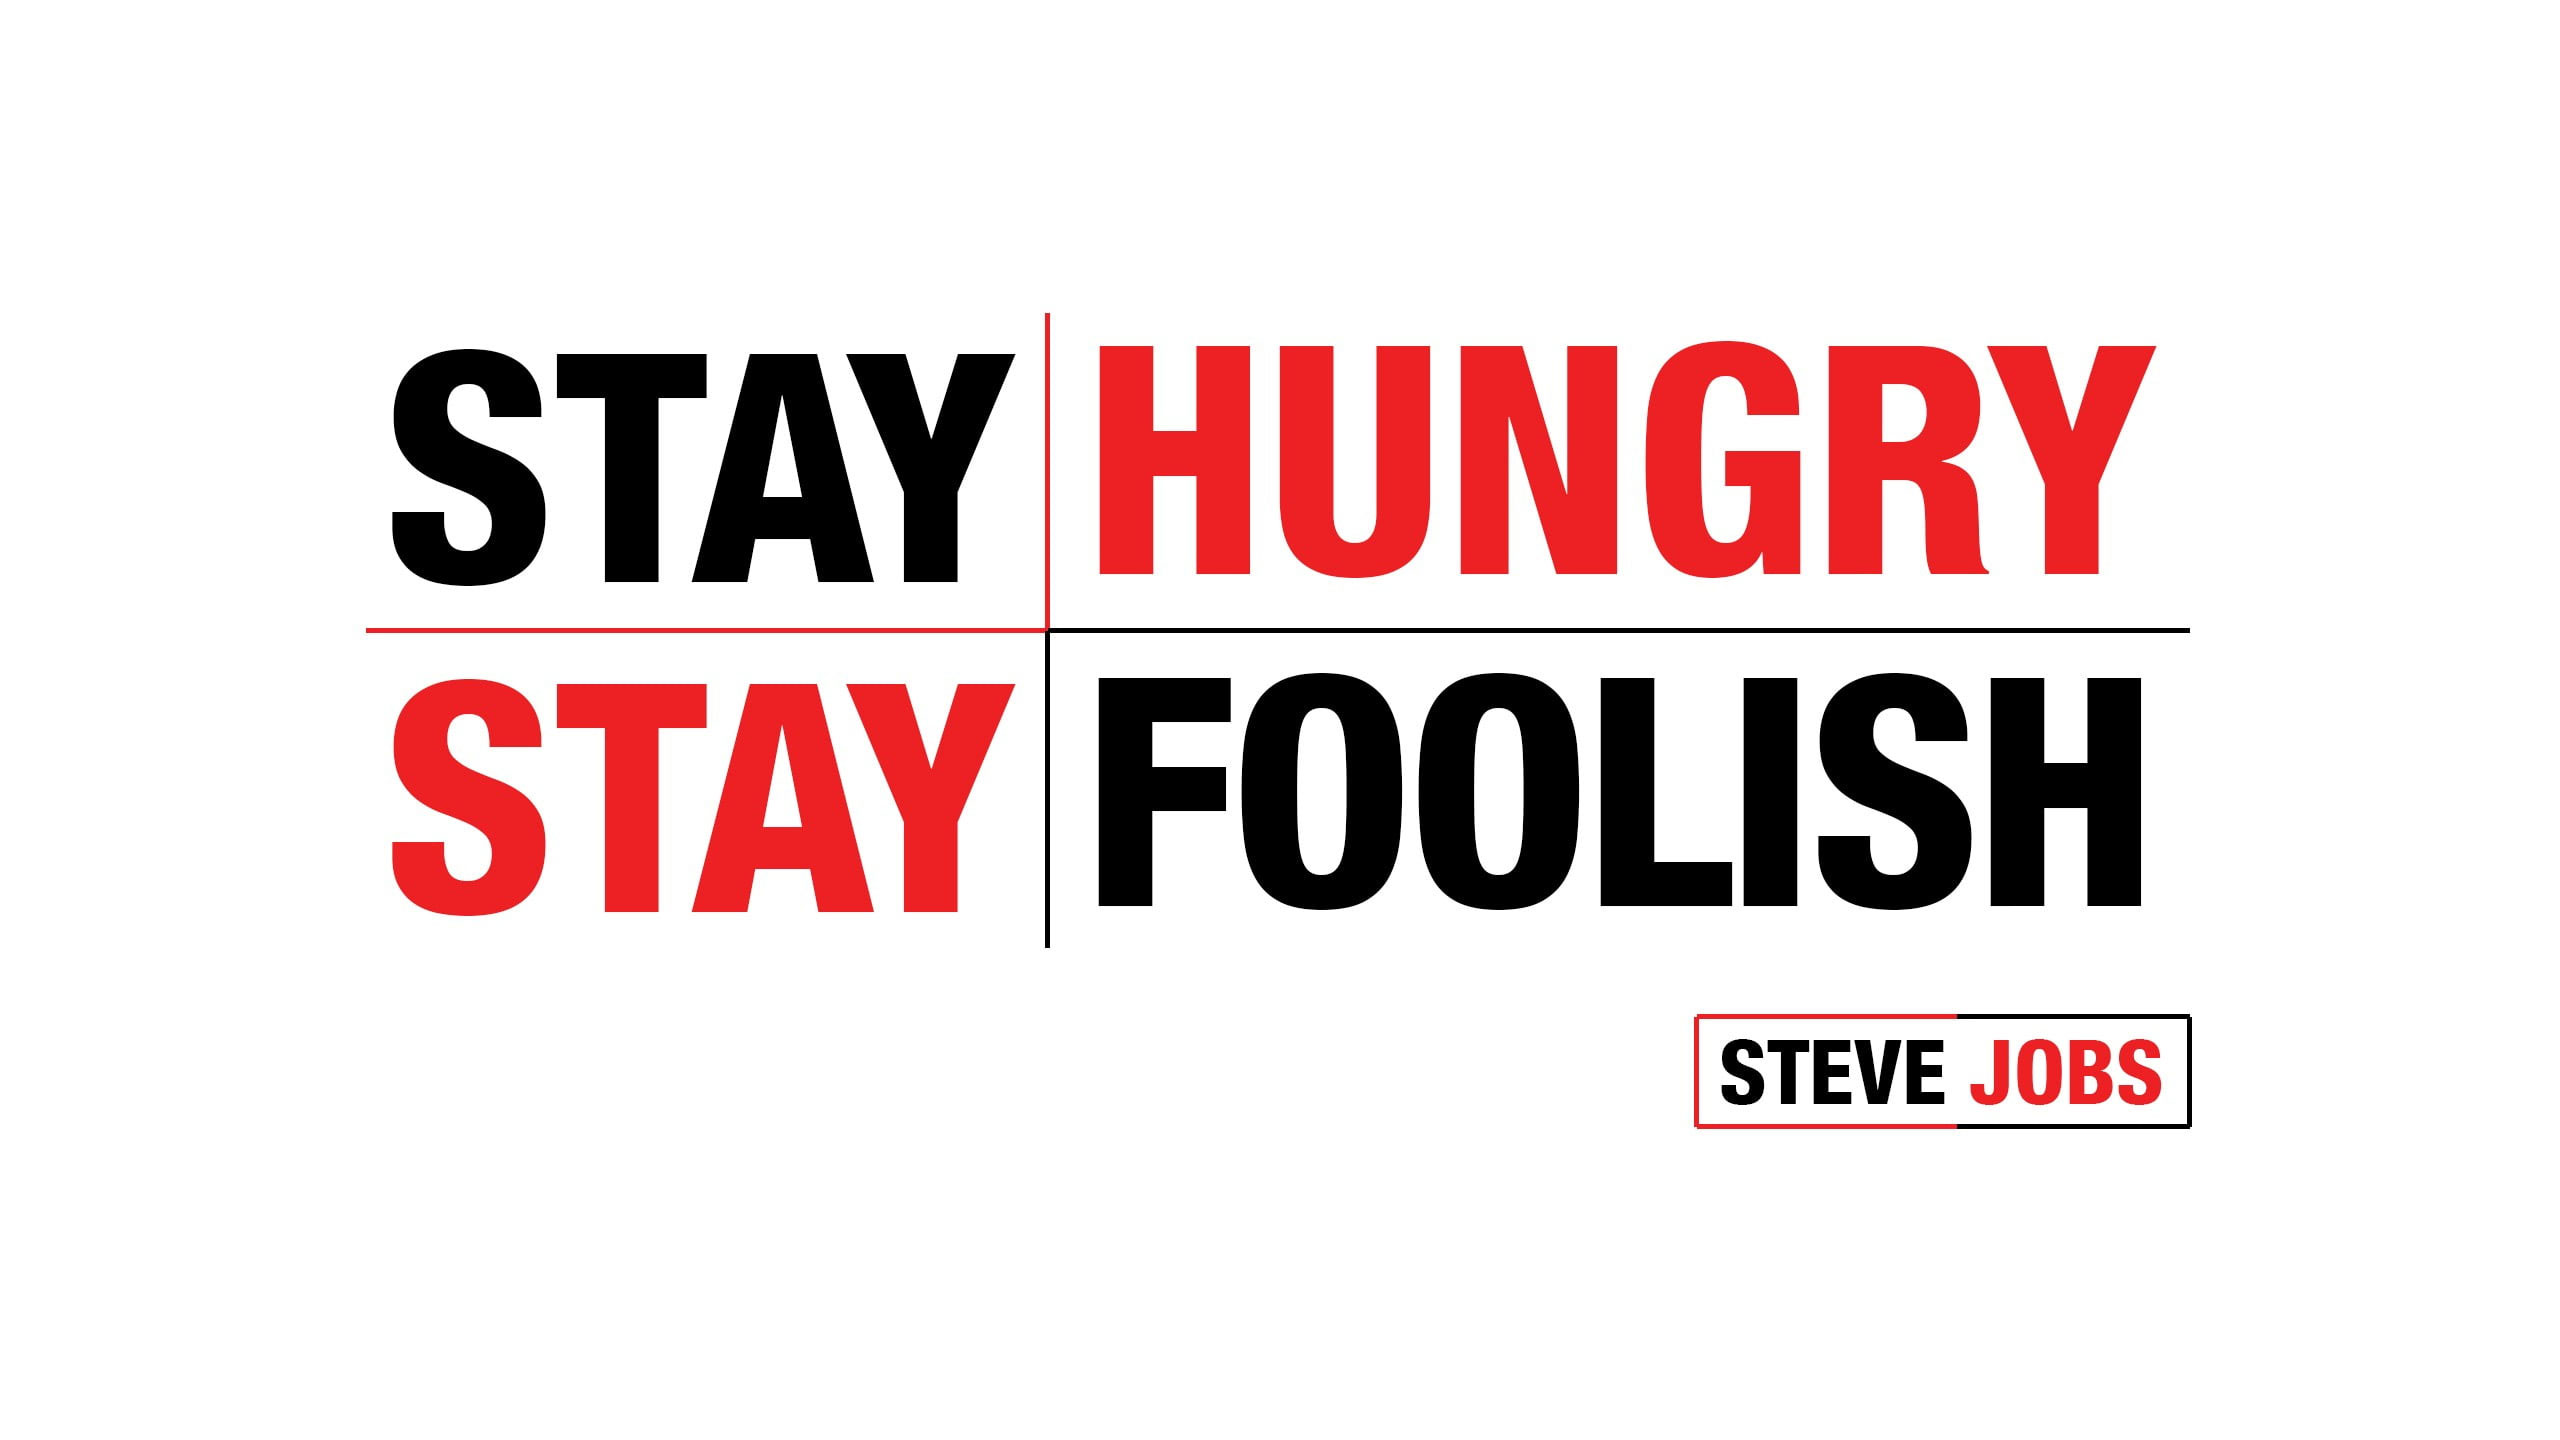 Stay Hungry Stay Foolish text, Steve Jobs, quote, minimalism